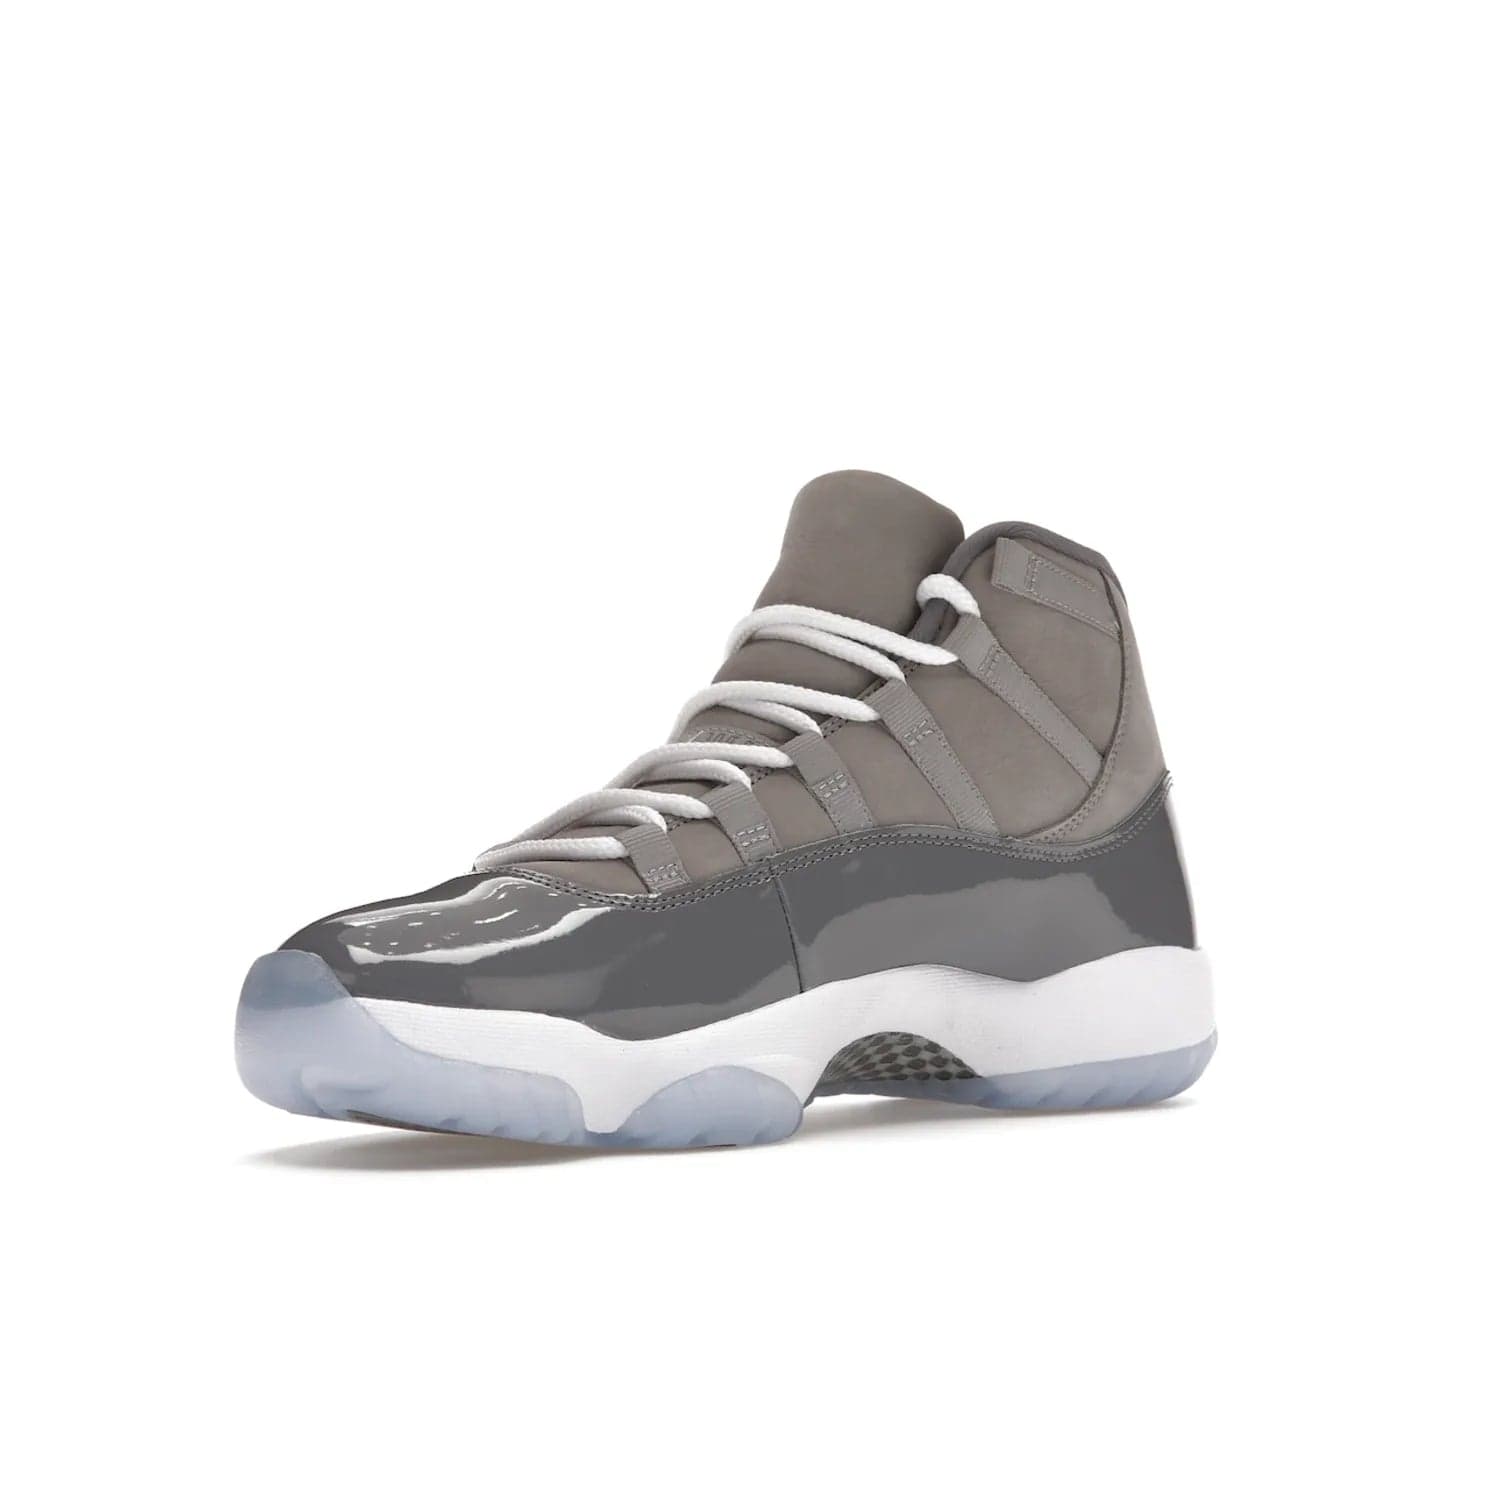 Jordan 11 Retro Cool Grey (2021) - Image 15 - Only at www.BallersClubKickz.com - Shop the Air Jordan 11 Retro Cool Grey (2021) for a must-have sneaker with a Cool Grey Durabuck upper, patent leather overlays, signature Jumpman embroidery, a white midsole, icy blue translucent outsole, and Multi-Color accents.  Released in December 2021 for $225.